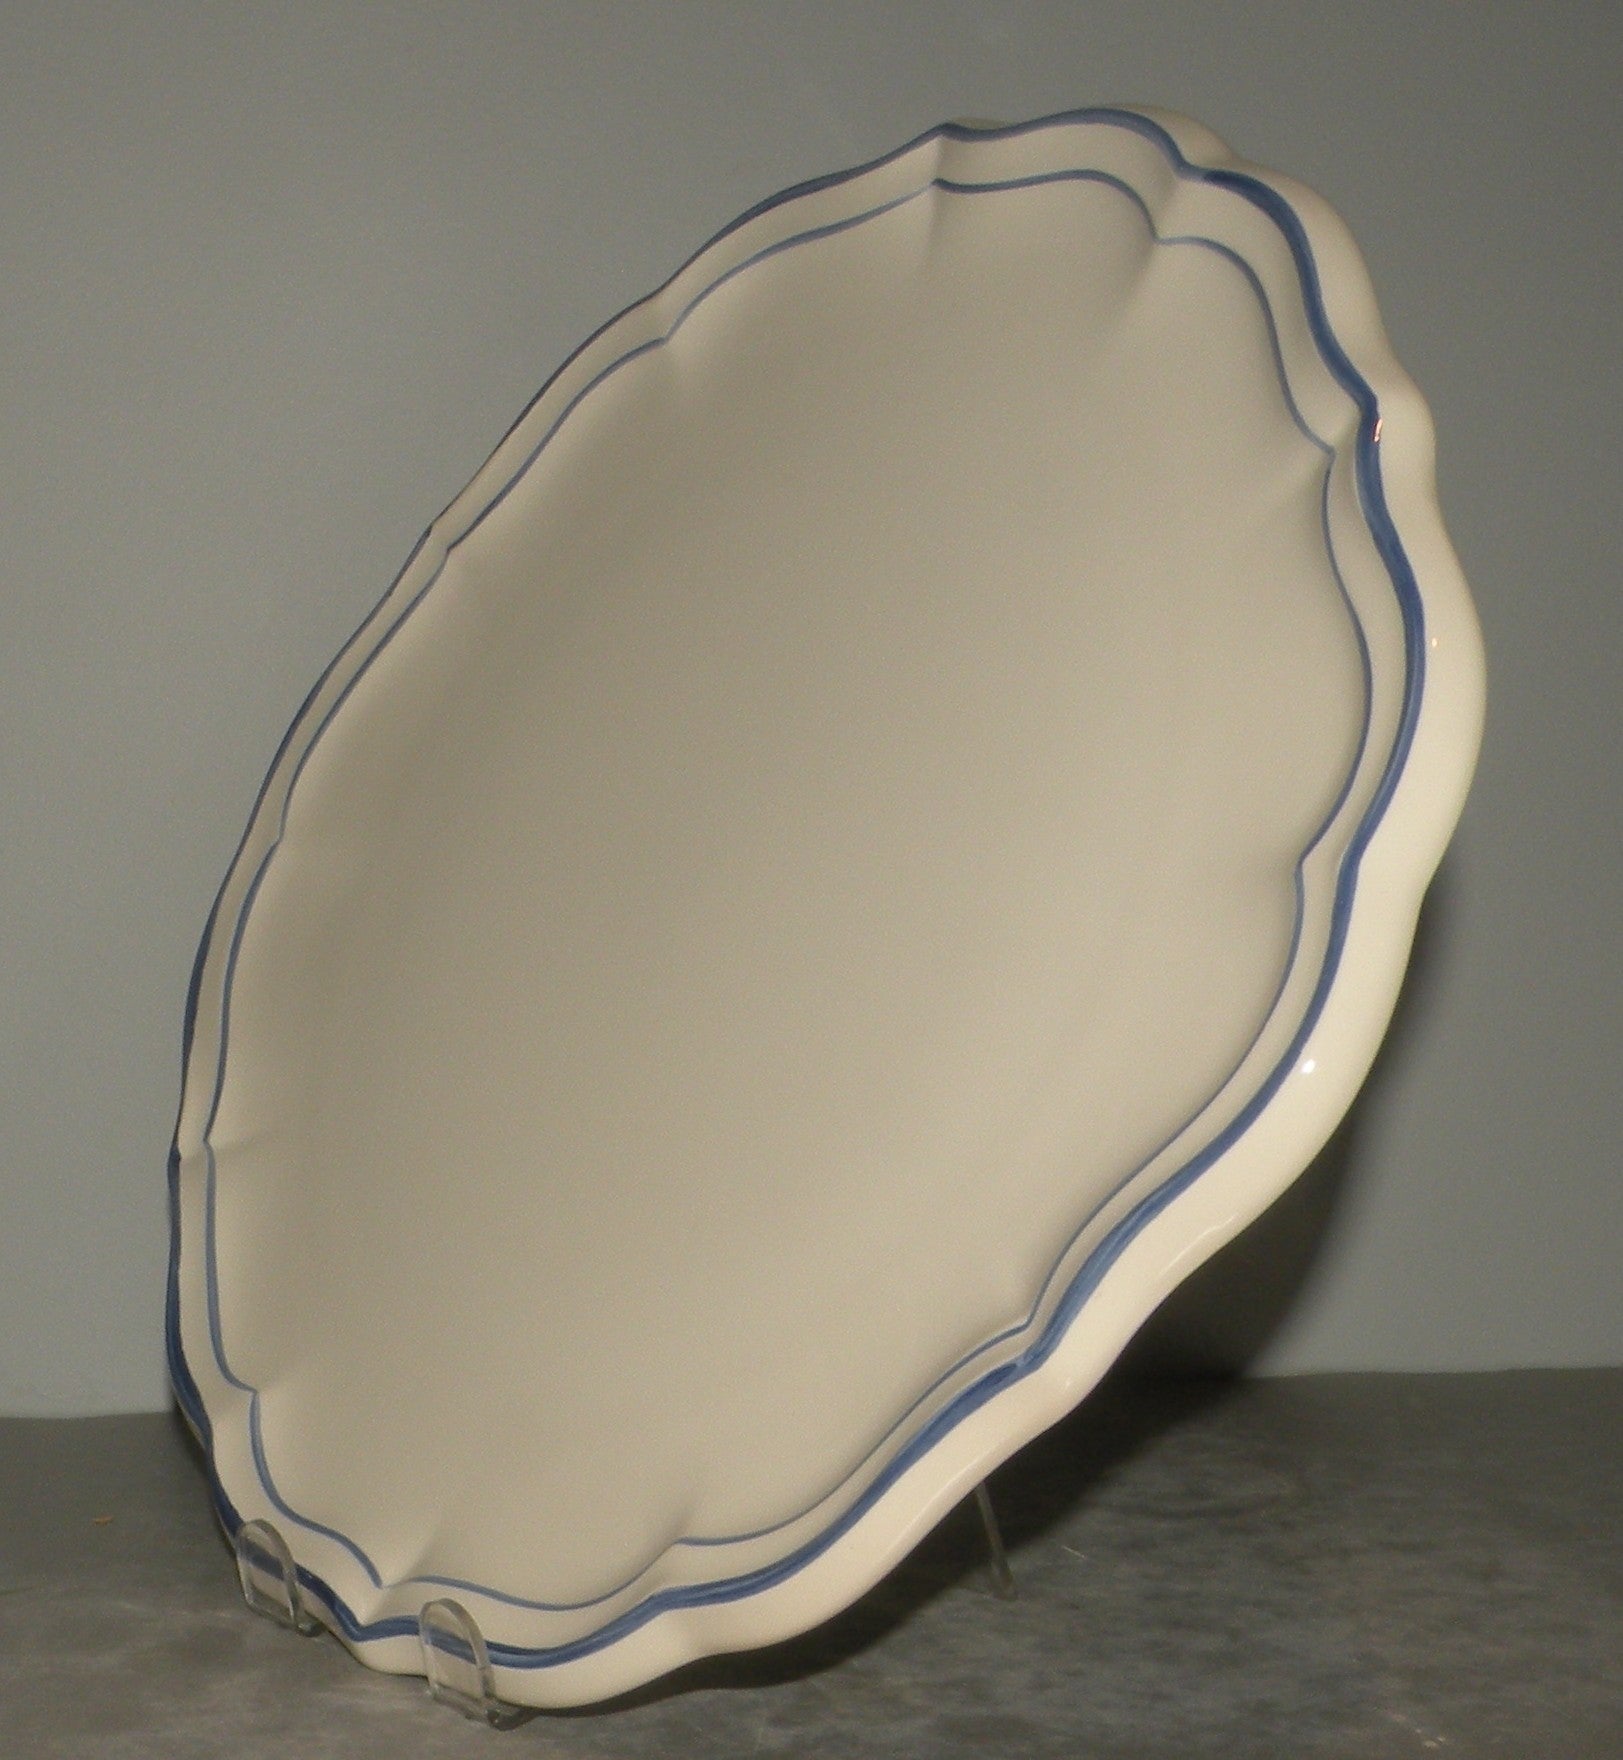 Eared Cake Platter, Filets Hand Painted